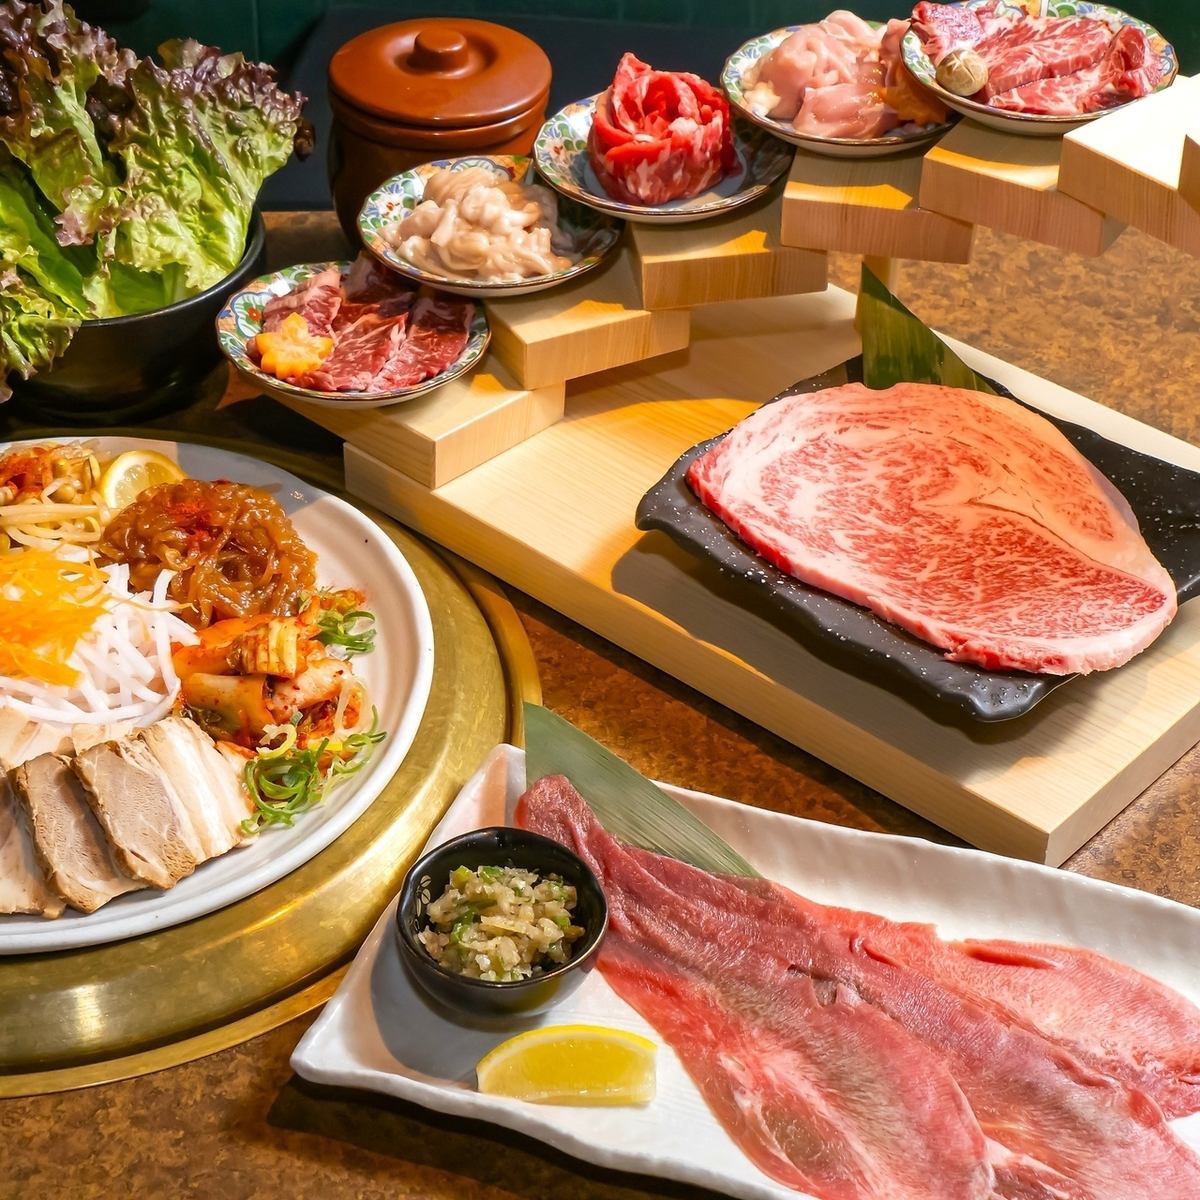 A luxurious tiered meal with all-you-can-drink for just 5,000 yen! Celebrate with yakiniku!